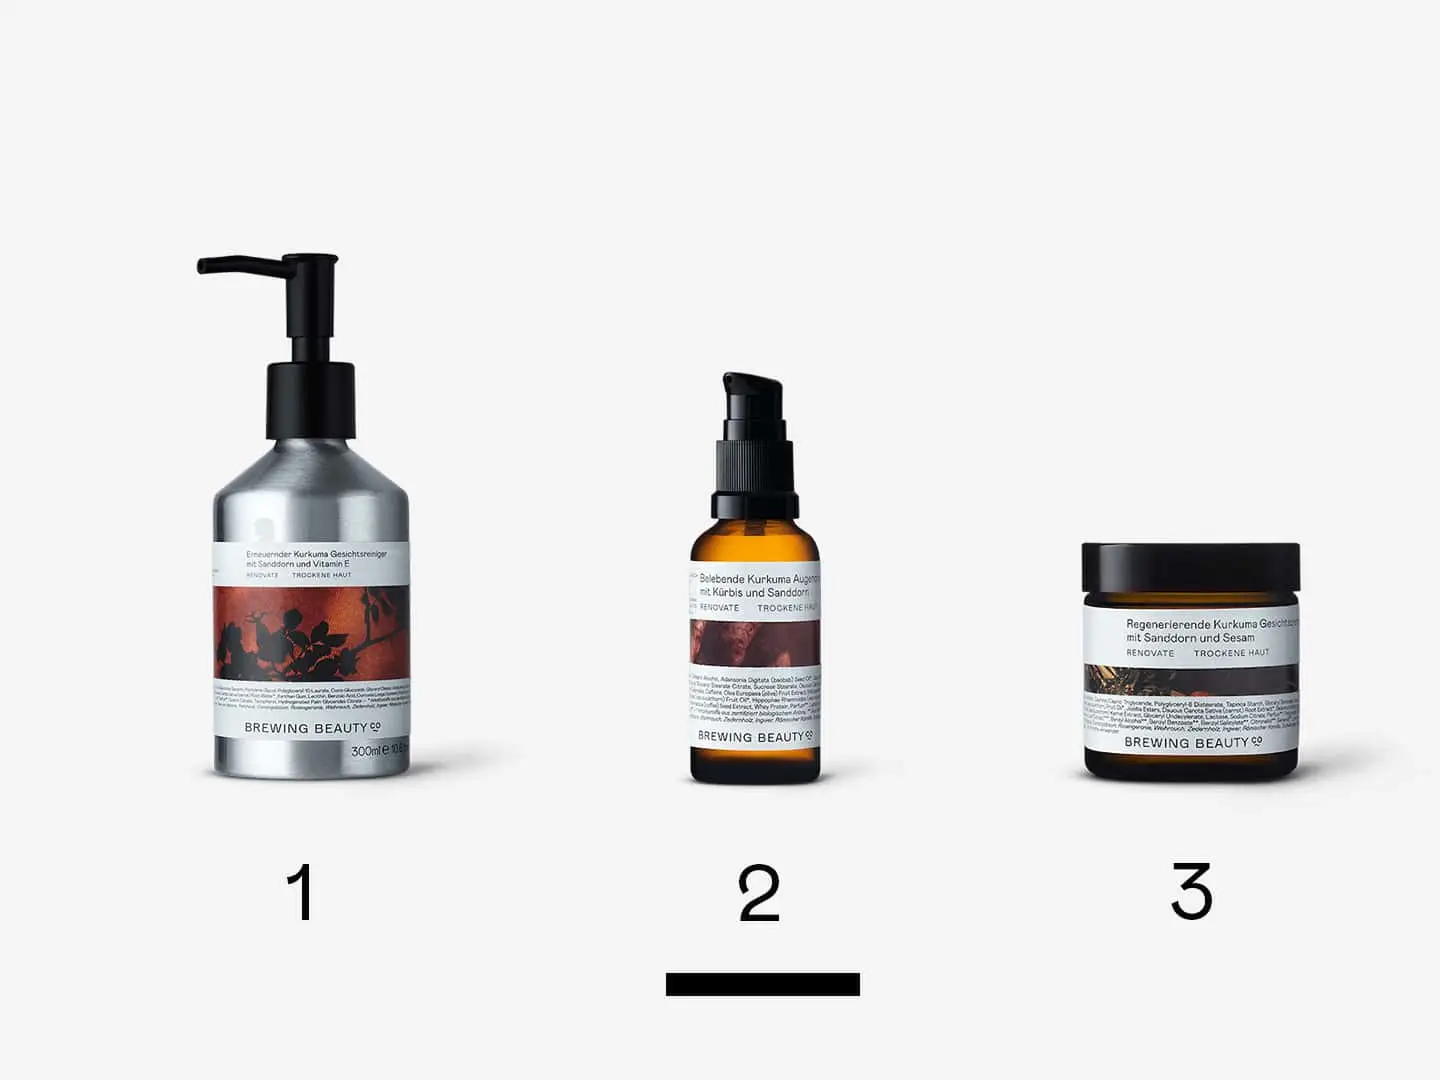 A lineup of Brewing Beauty products representing Routine No.41 